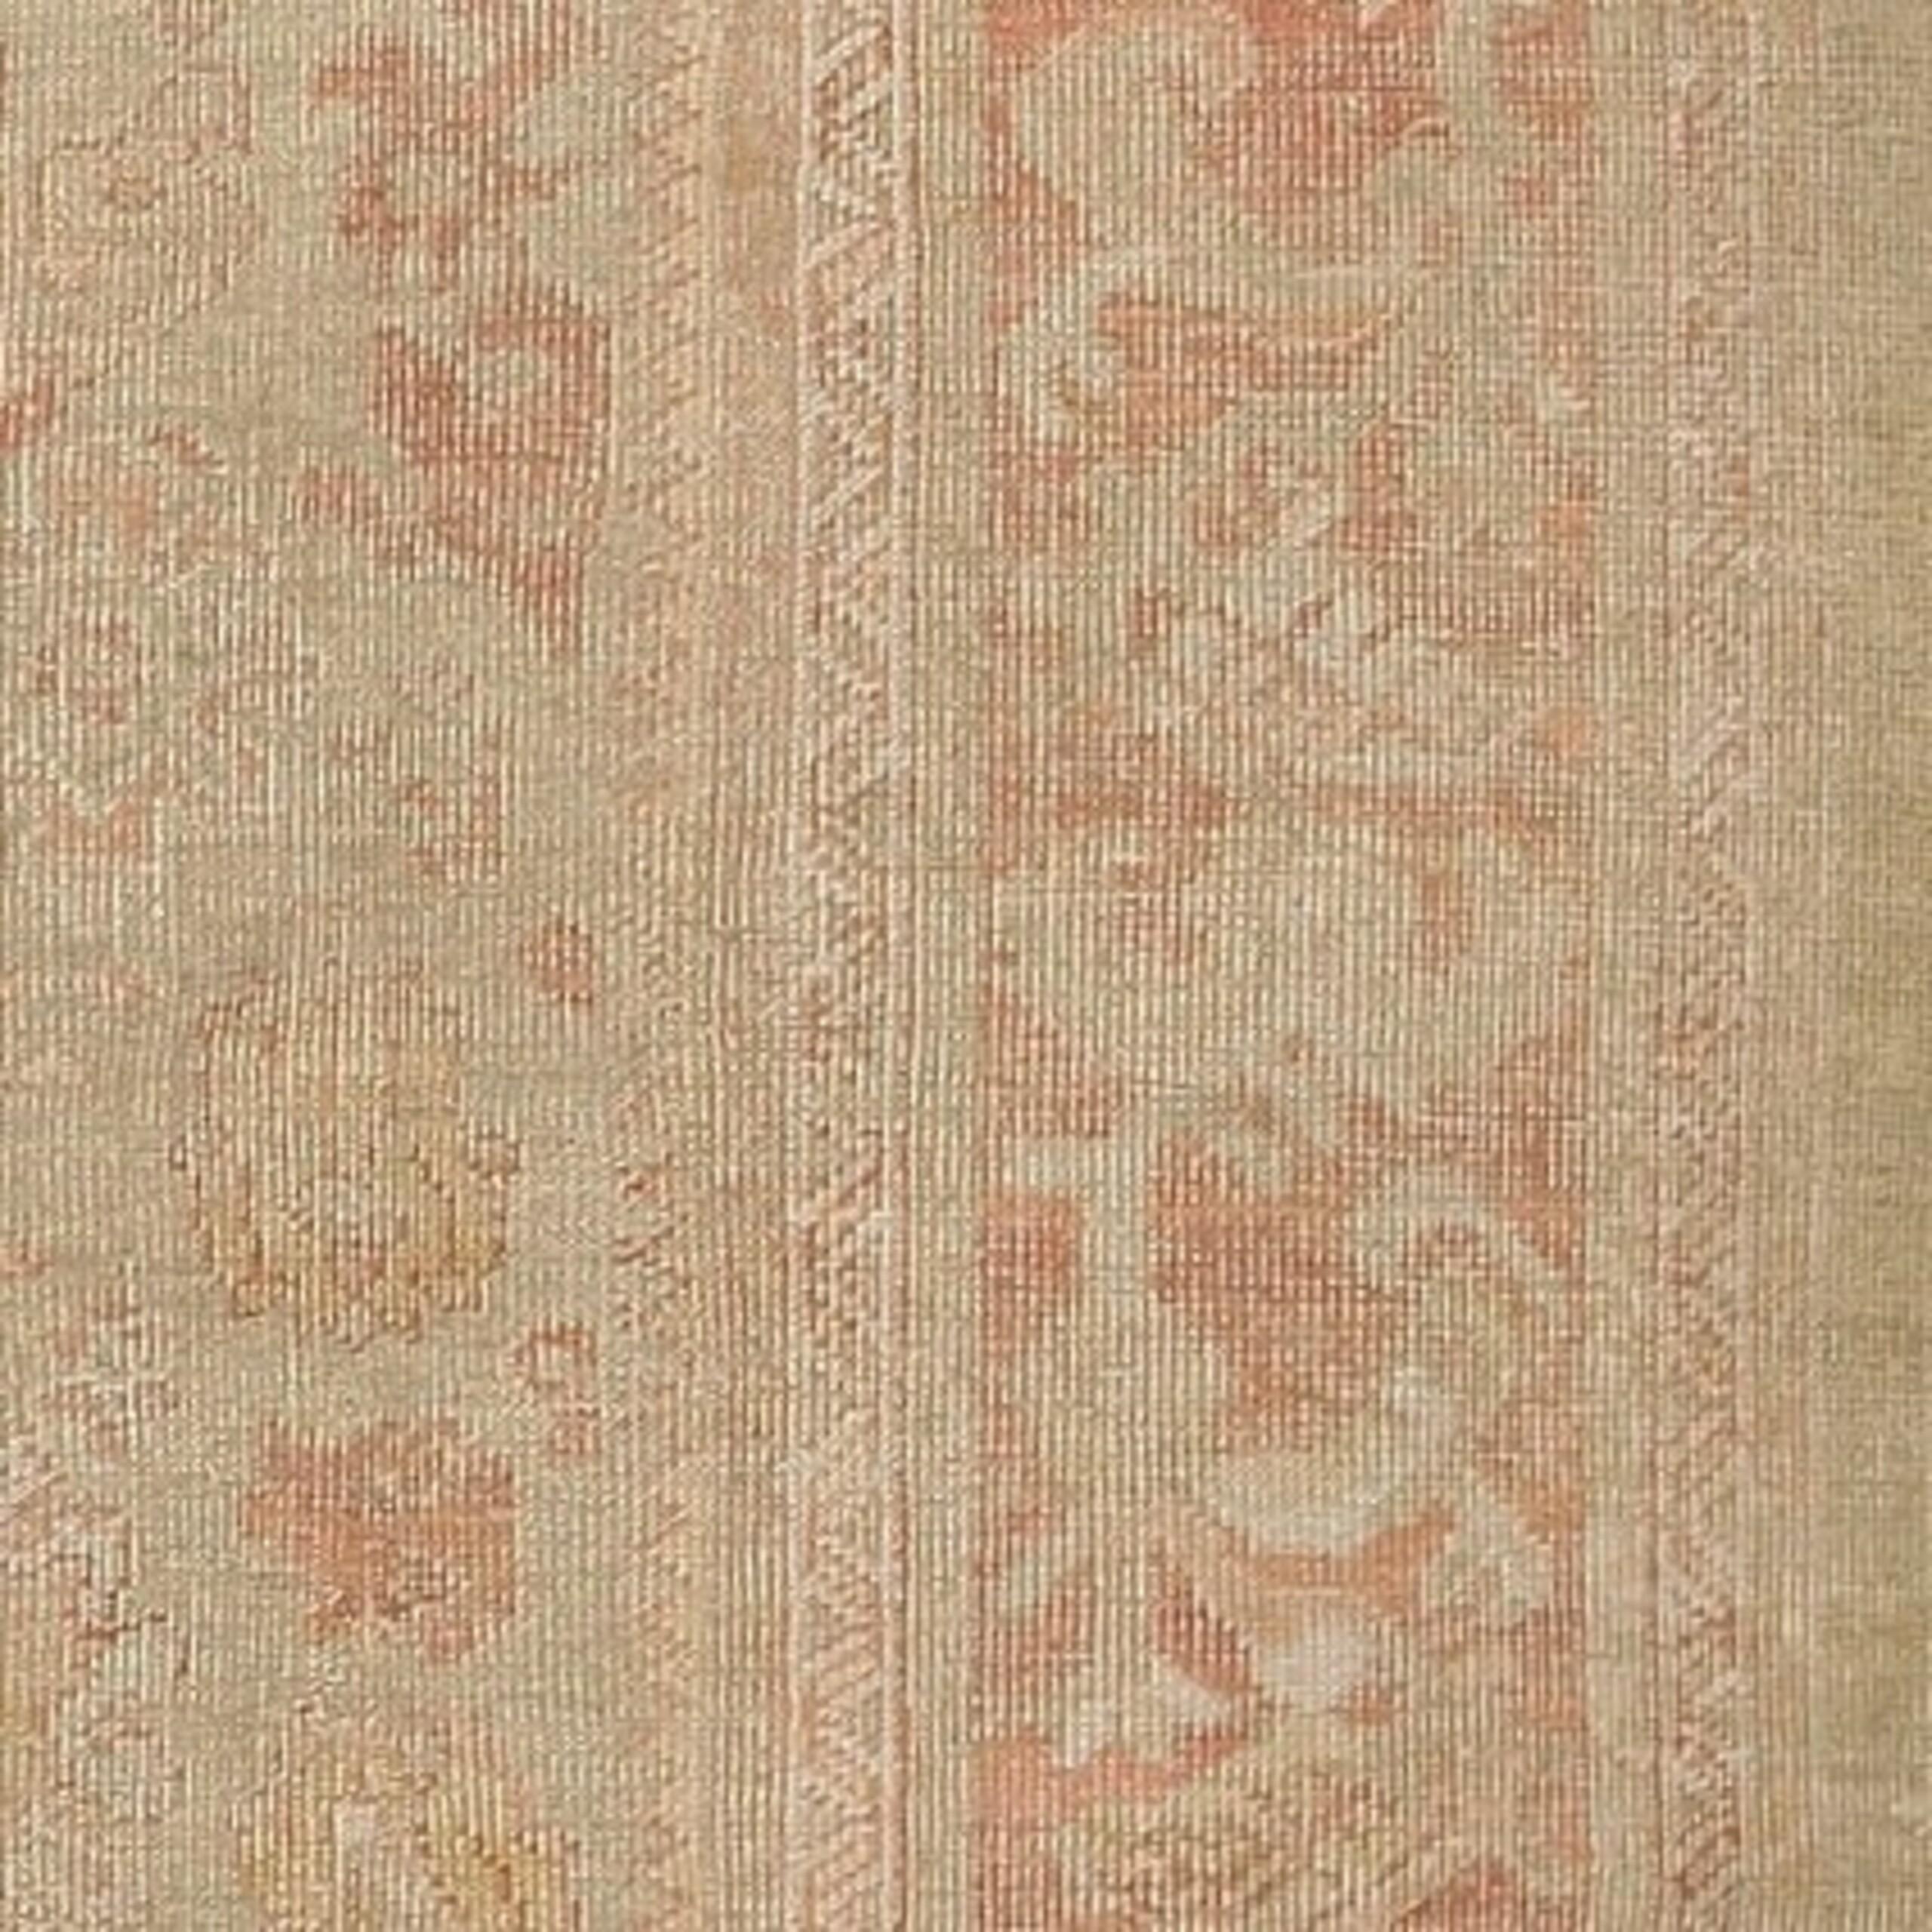 Antique Turkish Oushak Carpet, Country of Origin / Rug Type: Turkish Rugs, Circa date: Late 19th Century. Size: 10 ft 3 in x 17 ft 3 in (3.12 m x 5.26 m)

